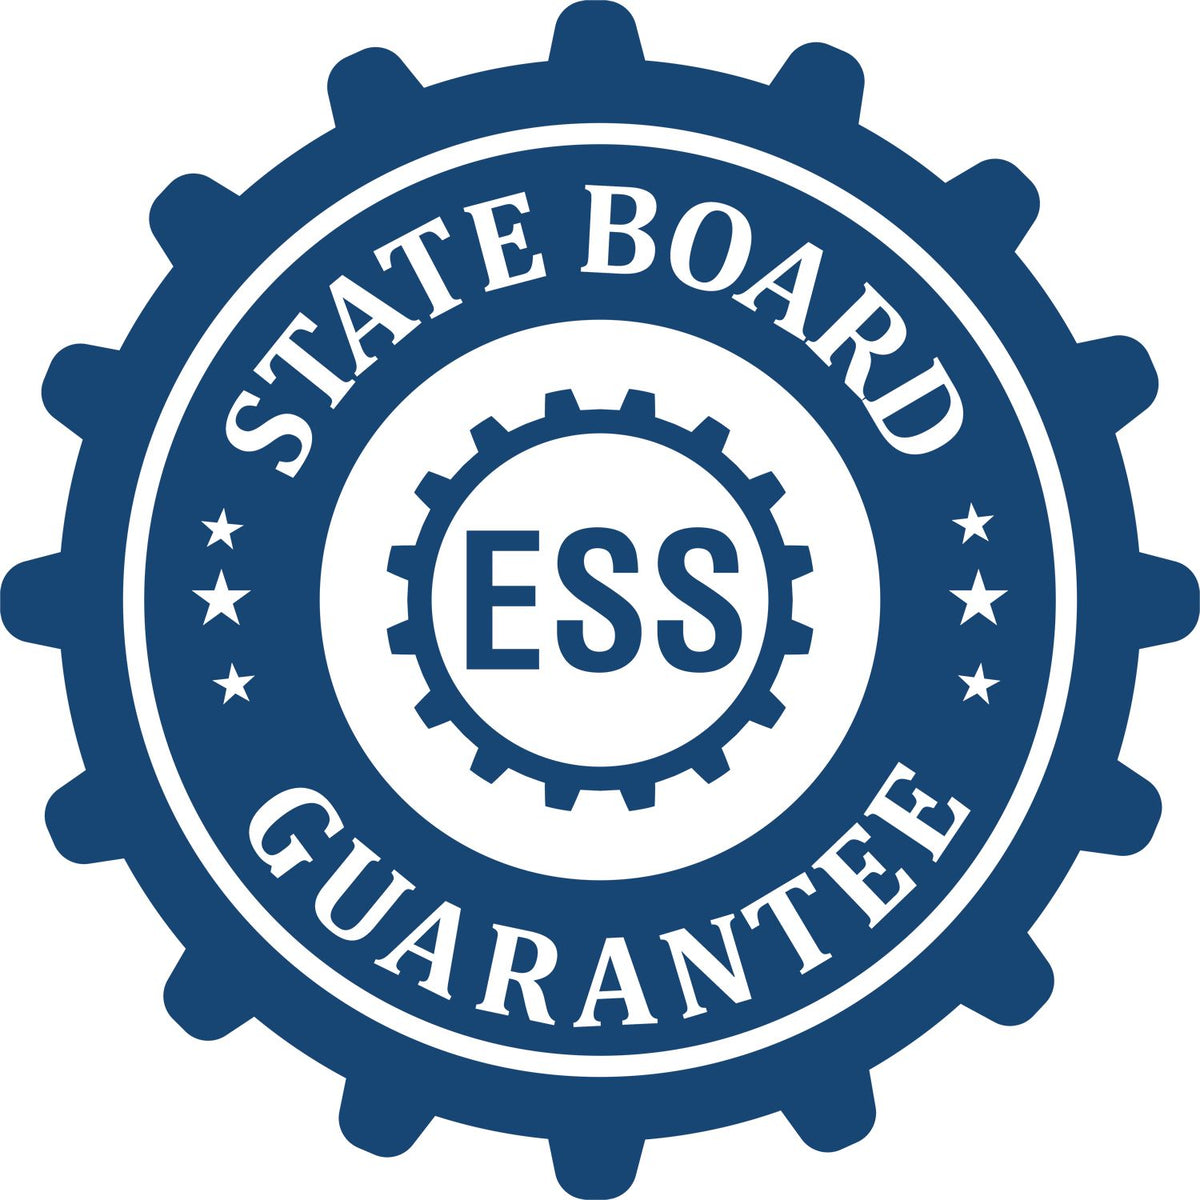 An emblem in a gear shape illustrating a state board guarantee for the State of Oklahoma Long Reach Architectural Embossing Seal product.